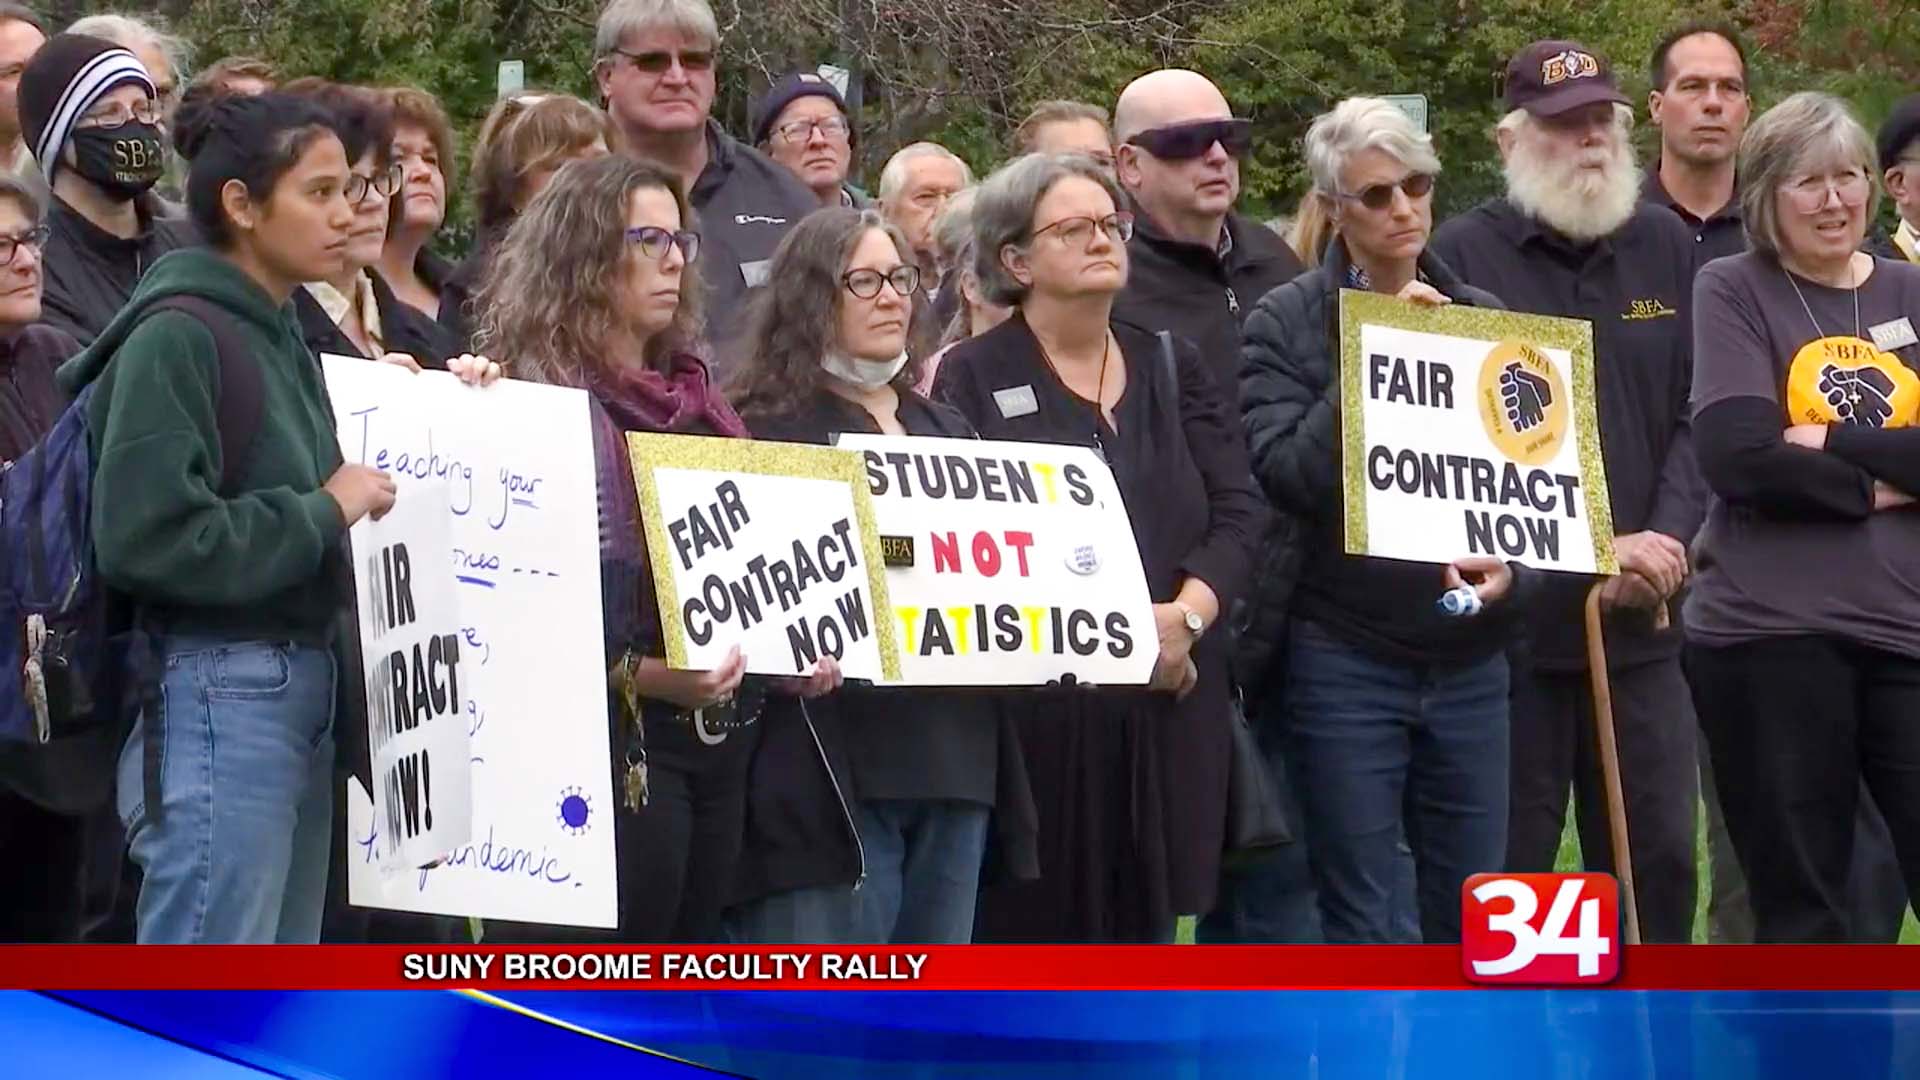 Union action gets results for SUNY Broome faculty